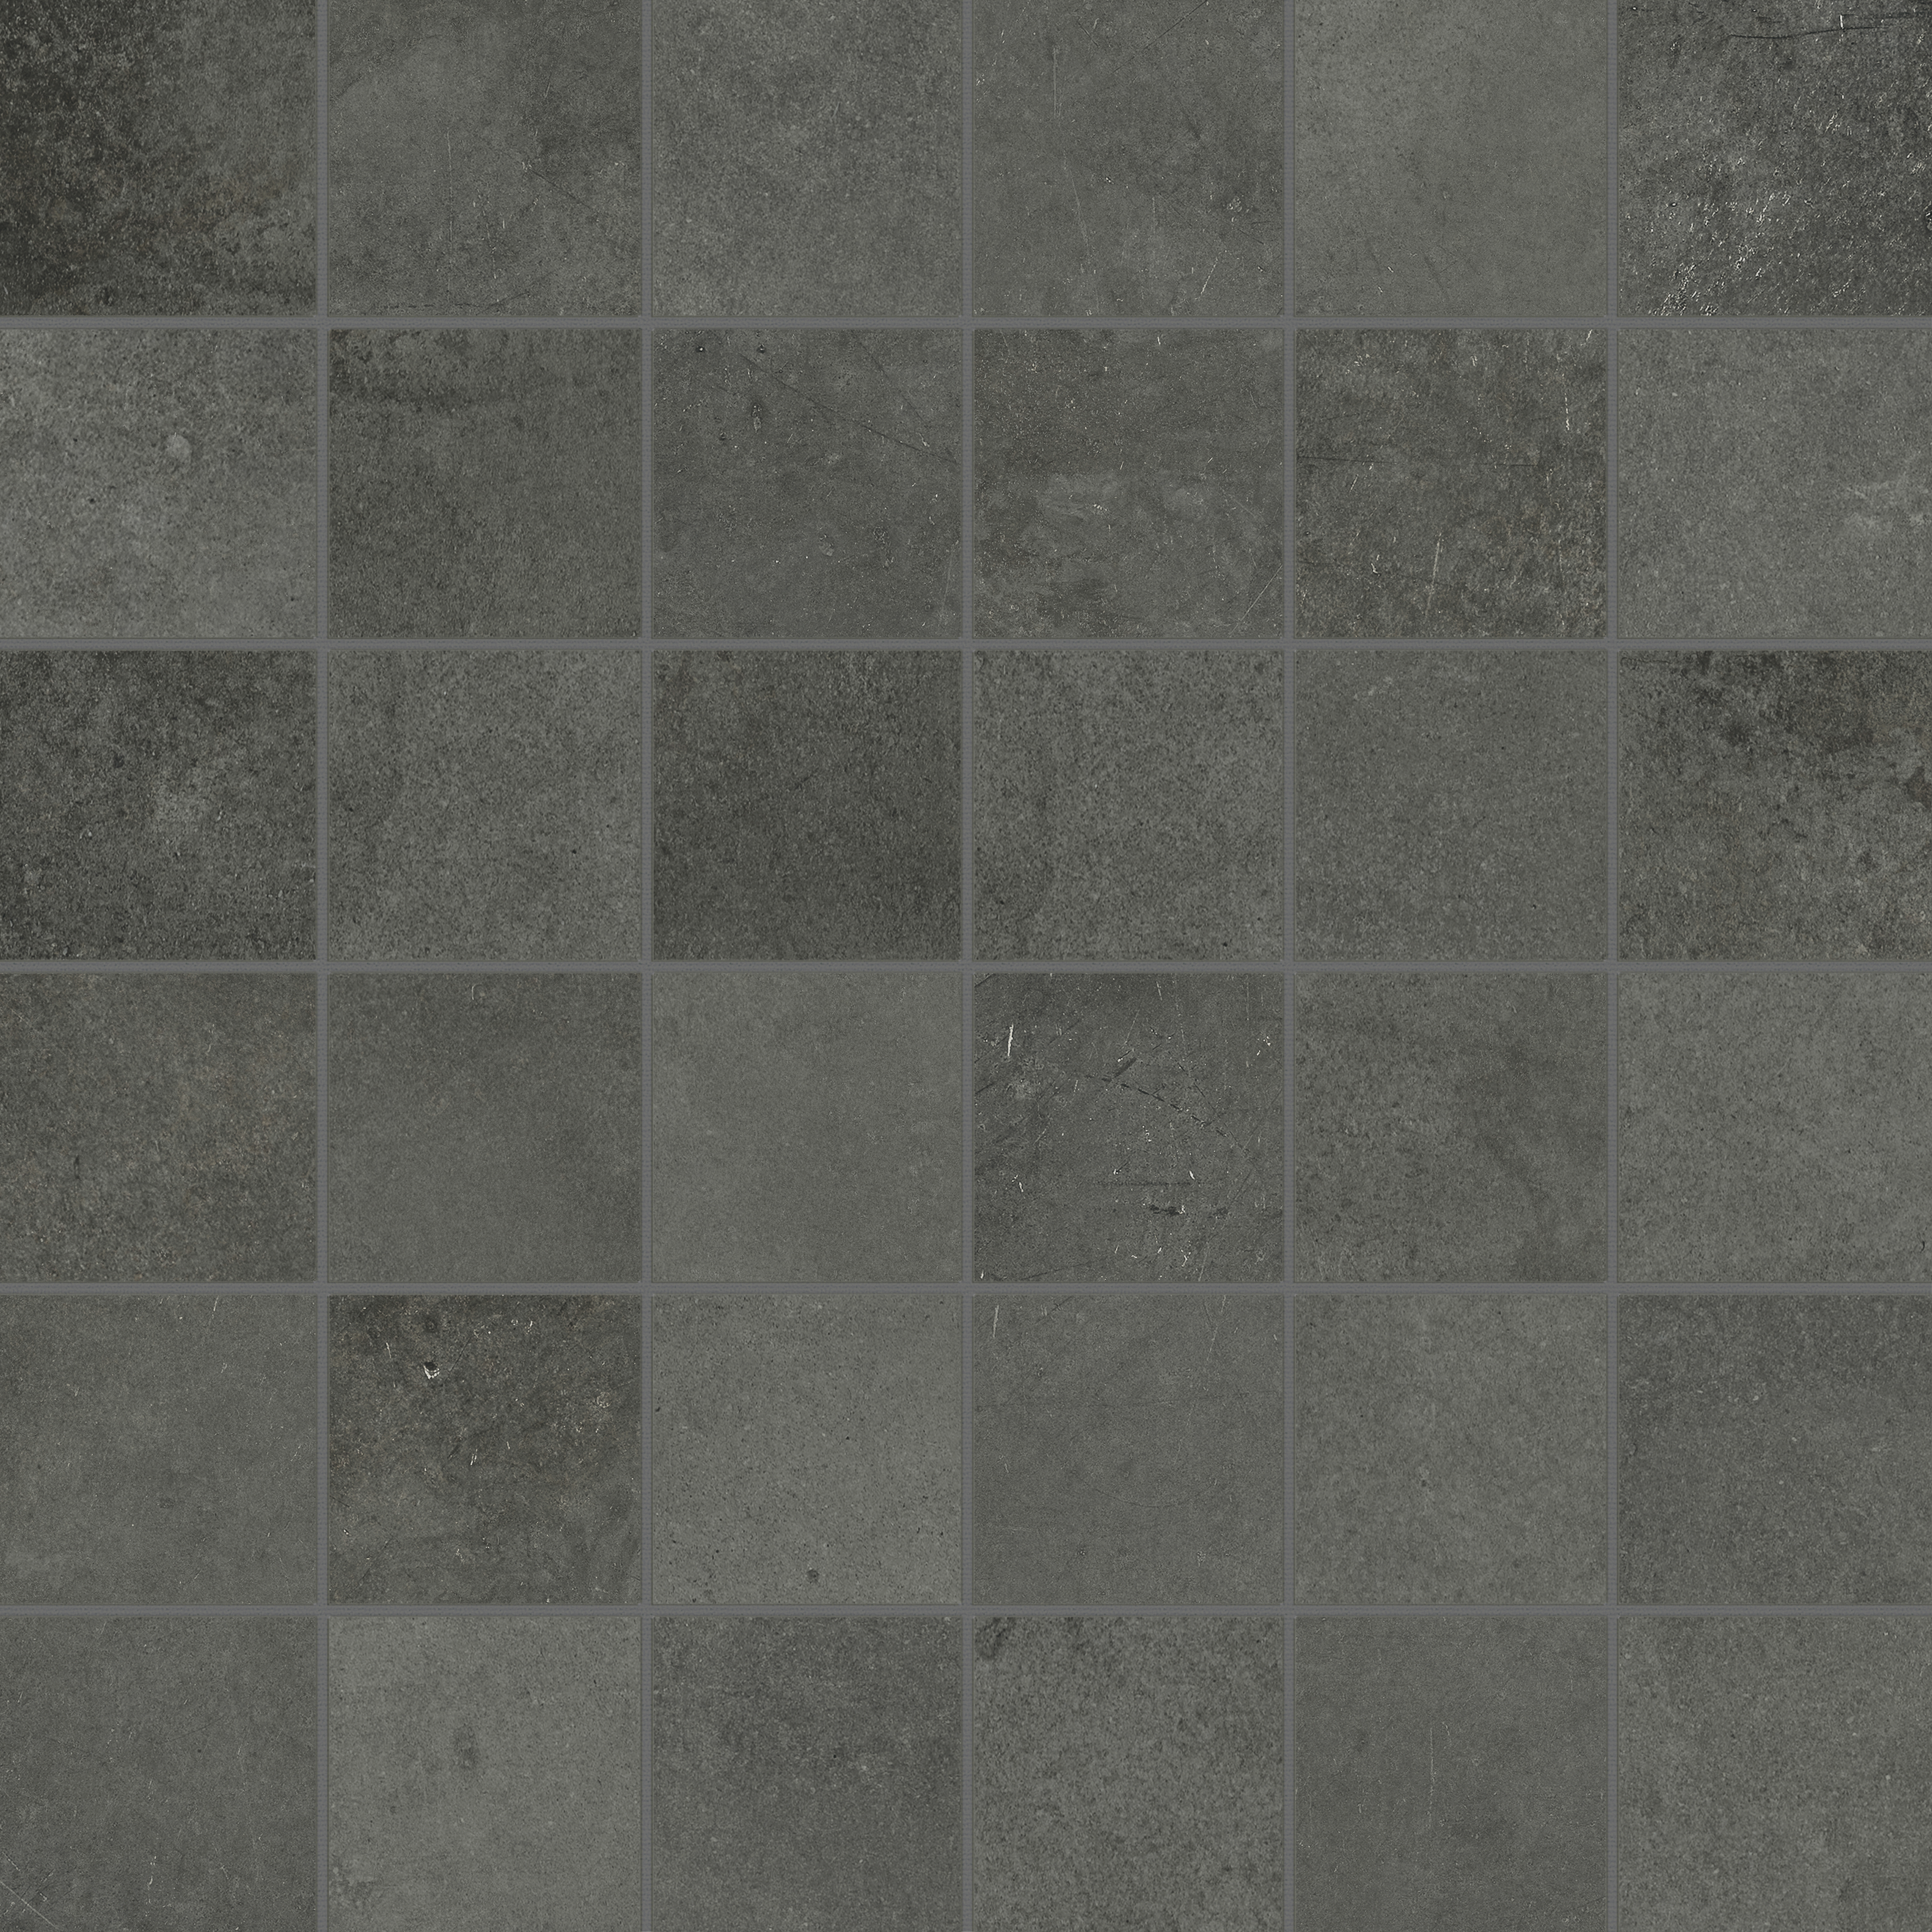 oxide straight stack 2x2-inch pattern color body porcelain mosaic from ceraforge anatolia collection distributed by surface group international matte finish straight edge edge mesh shape